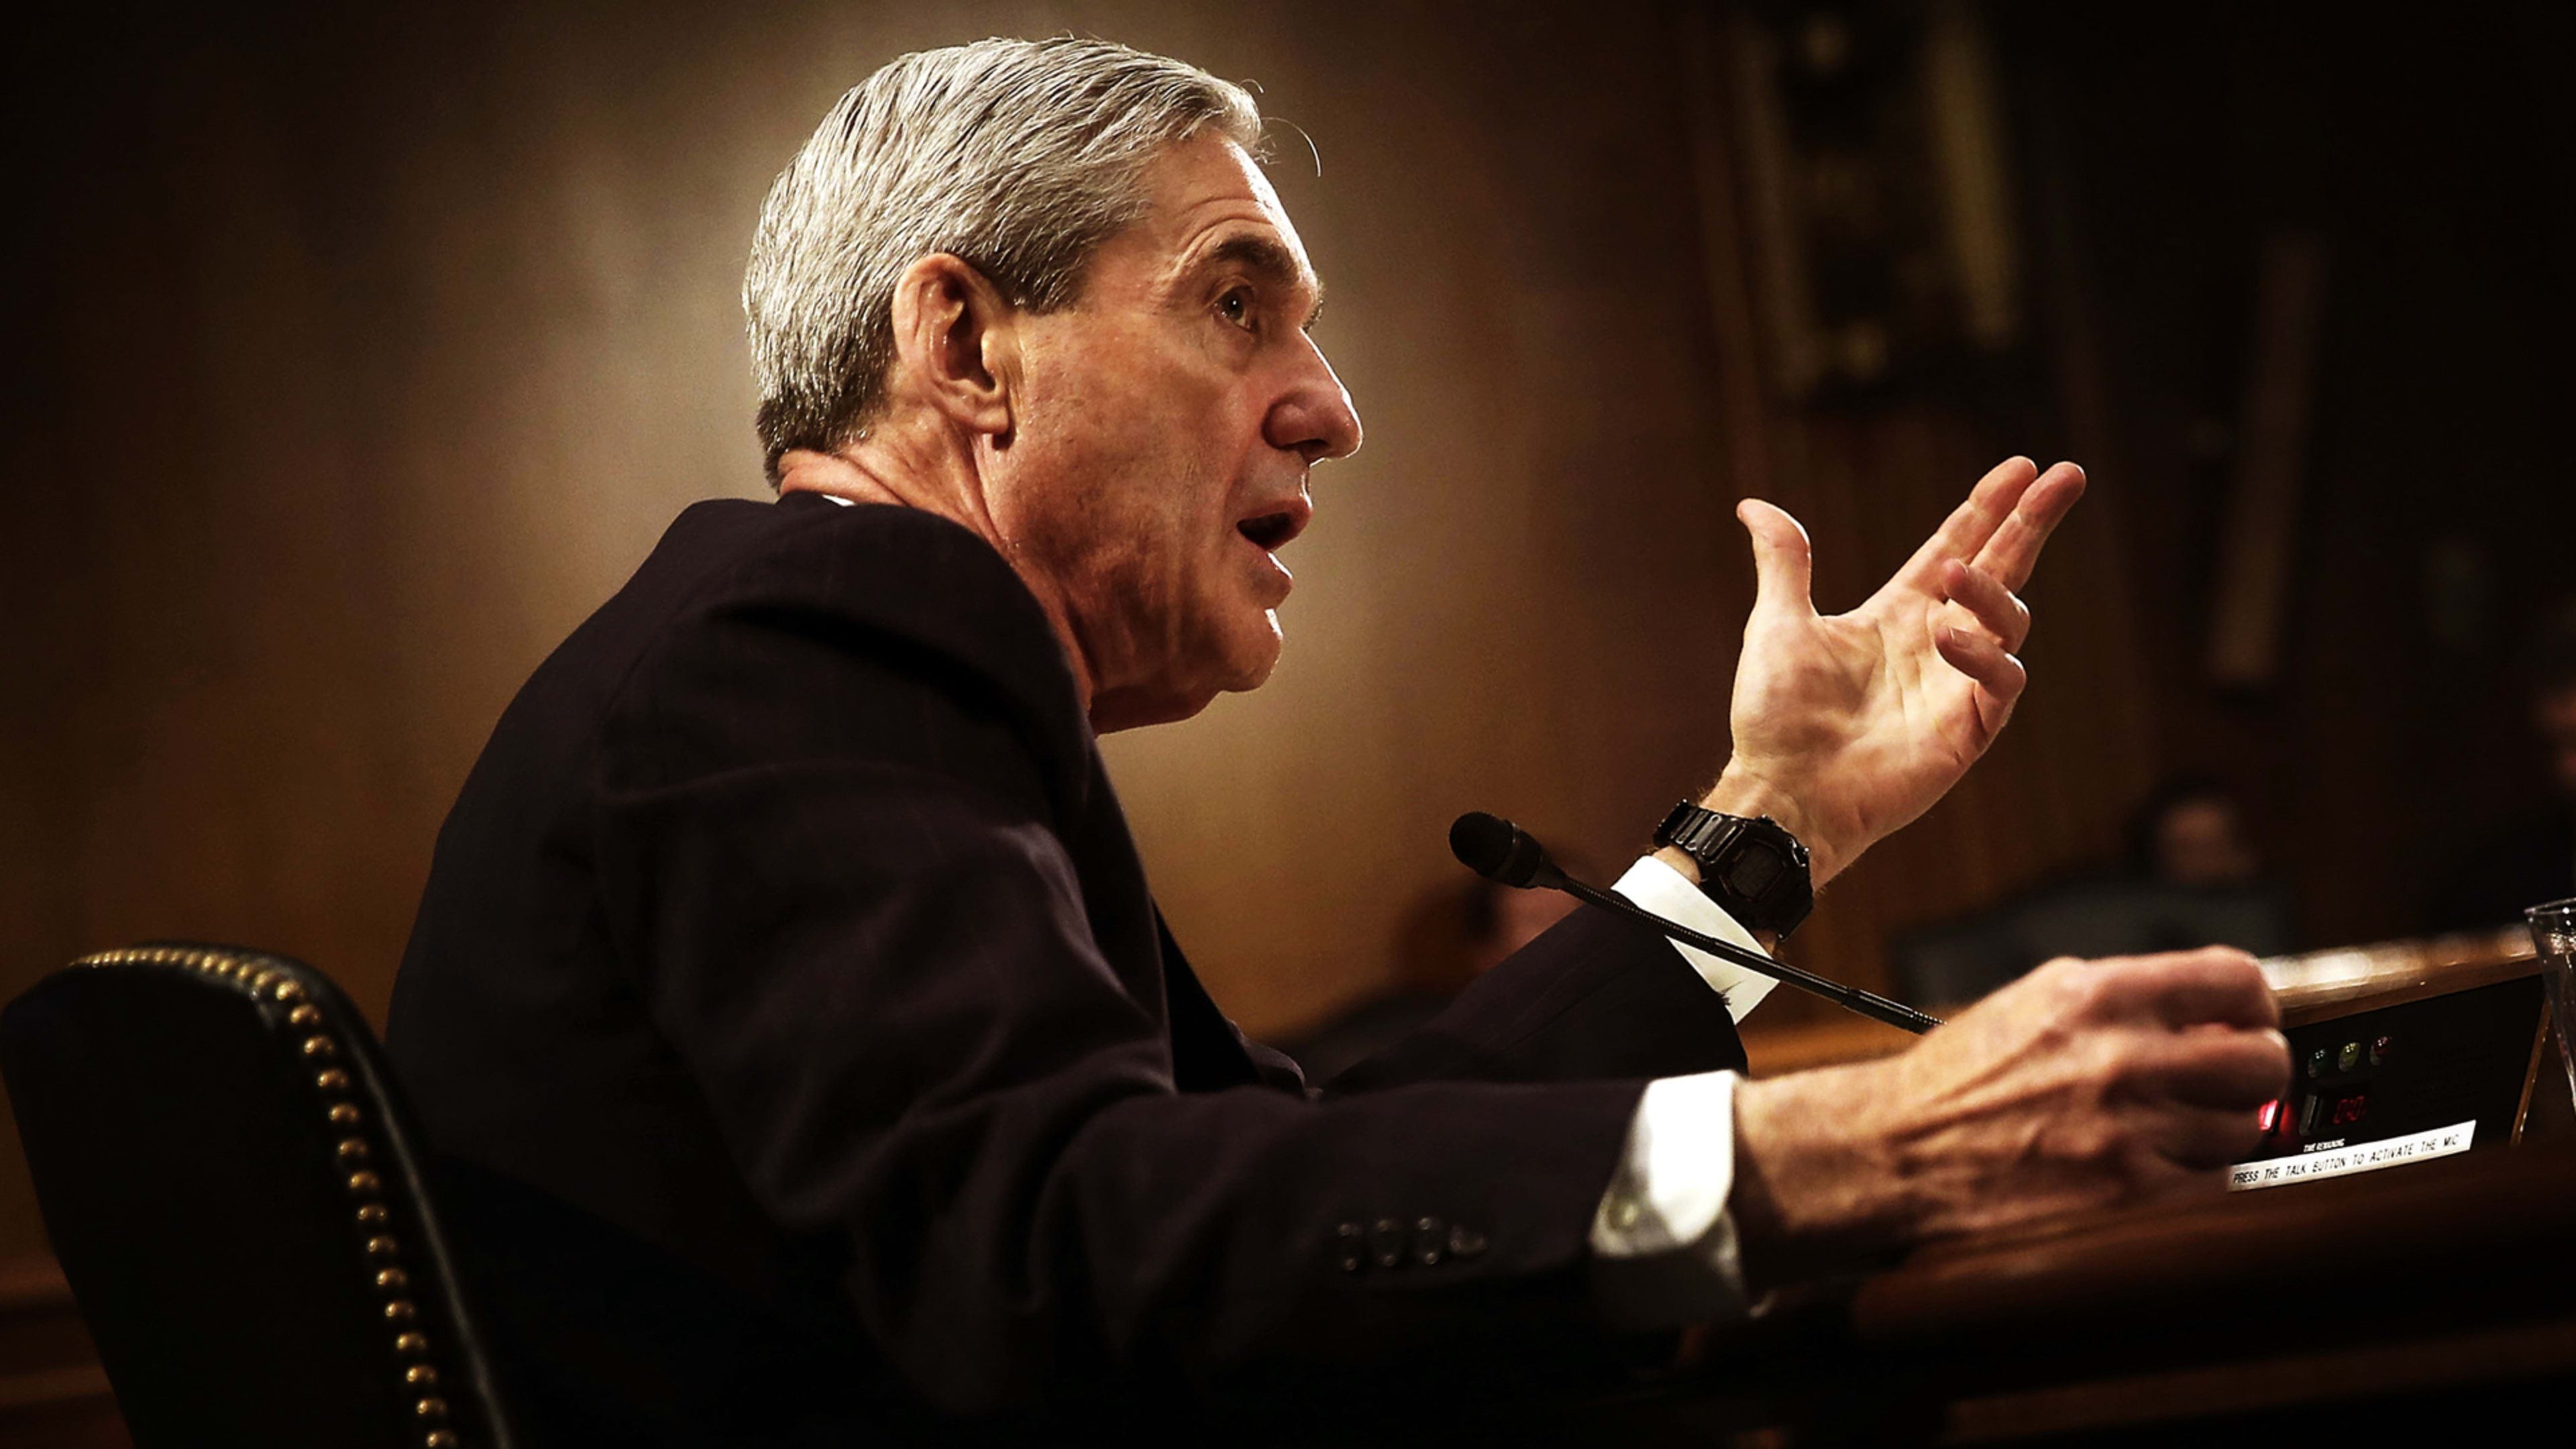 Barnes and Noble will put the Mueller report on your tablet for free